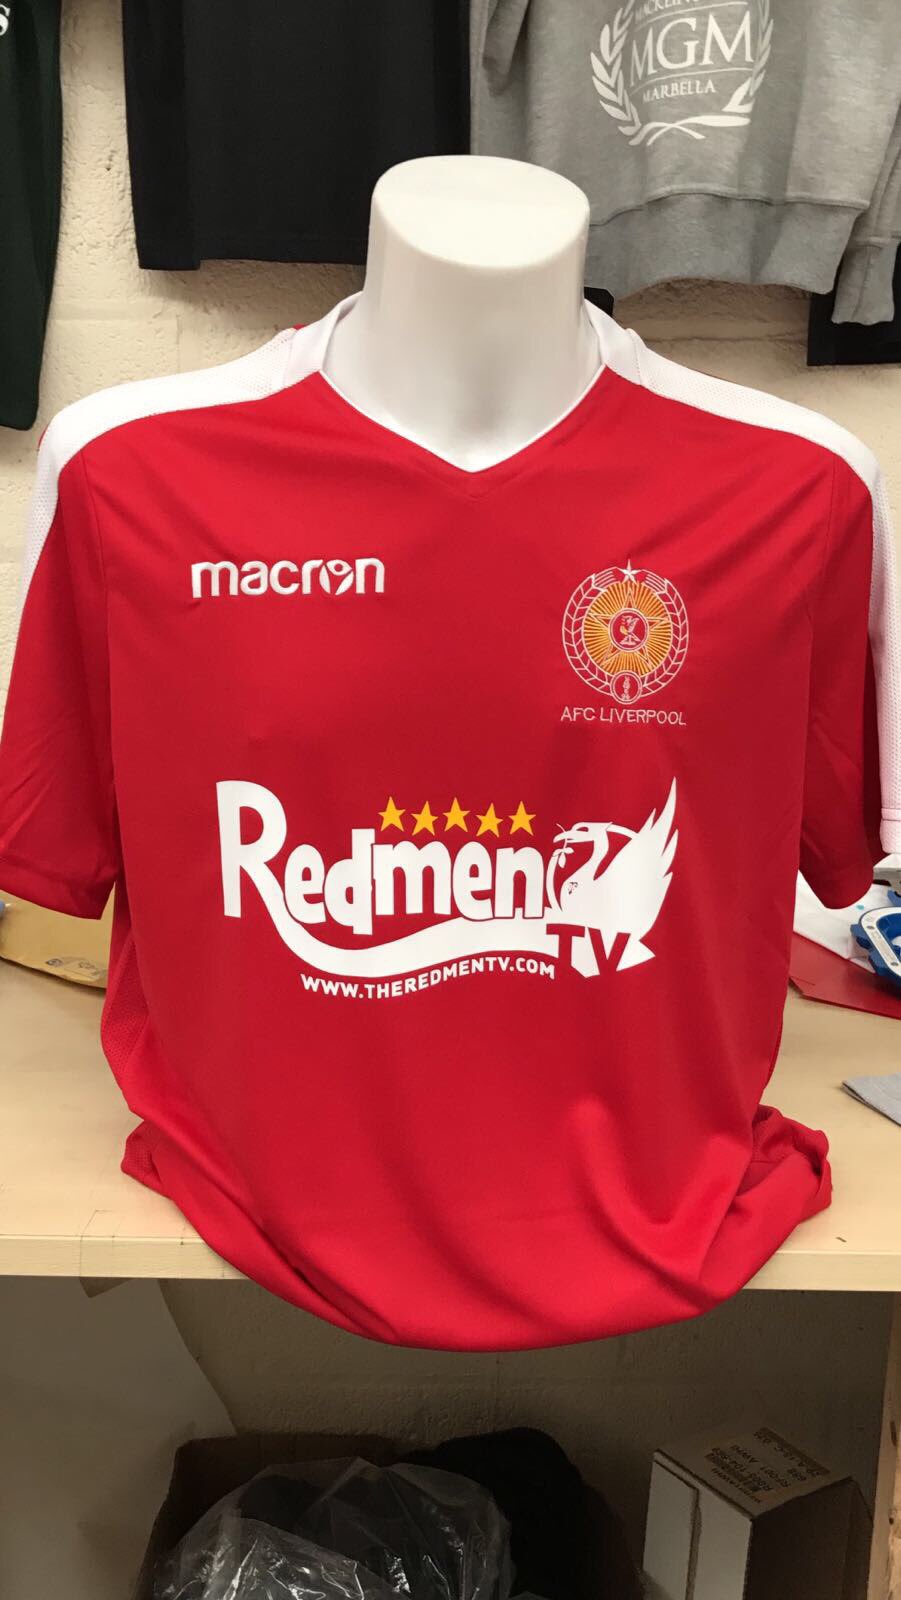 The Redmen TV on Twitter: "Proud to announce we will be sponsors of @AFCLiverpool this season 🔴🙌🏻⚽️ / Twitter